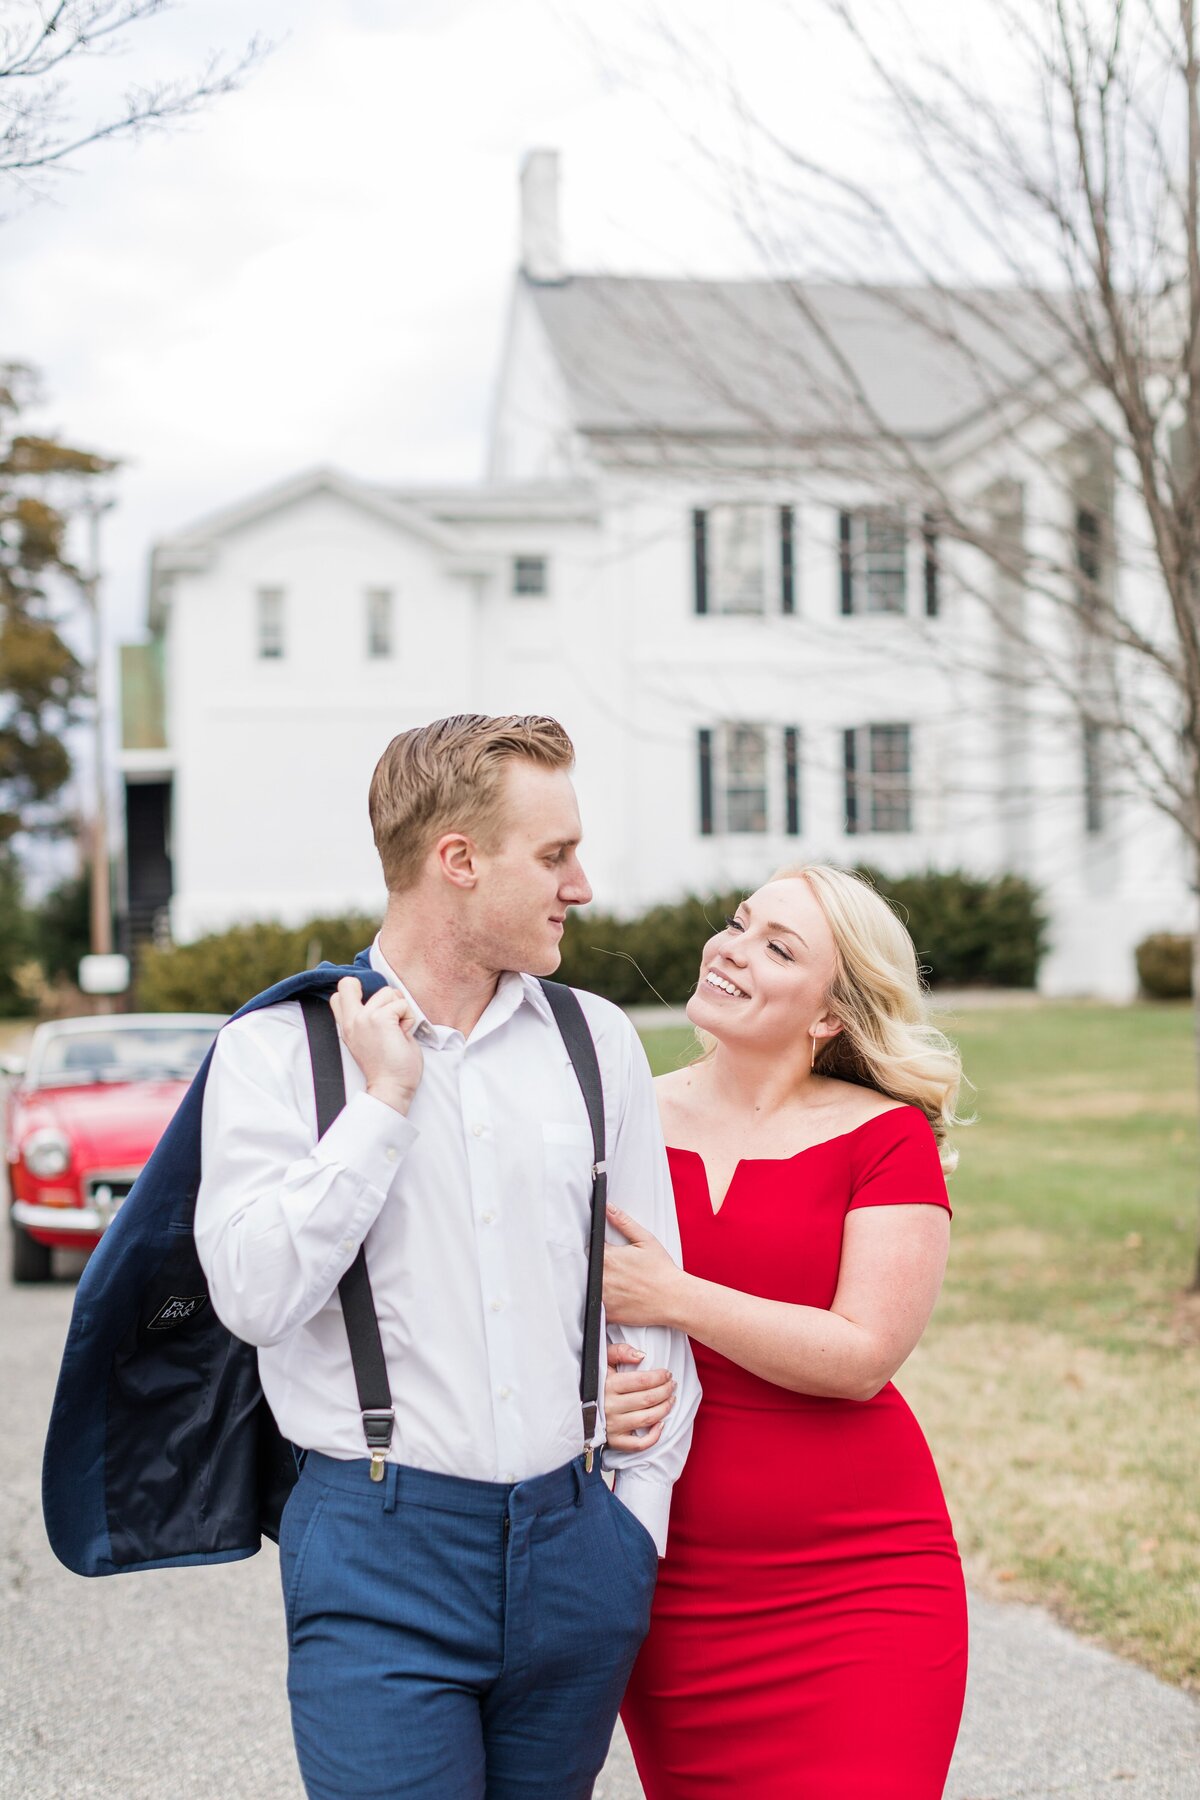 Vintage-Car-Engagement-Photos-DC-Maryland-Silver-Orchard-Creative_0029